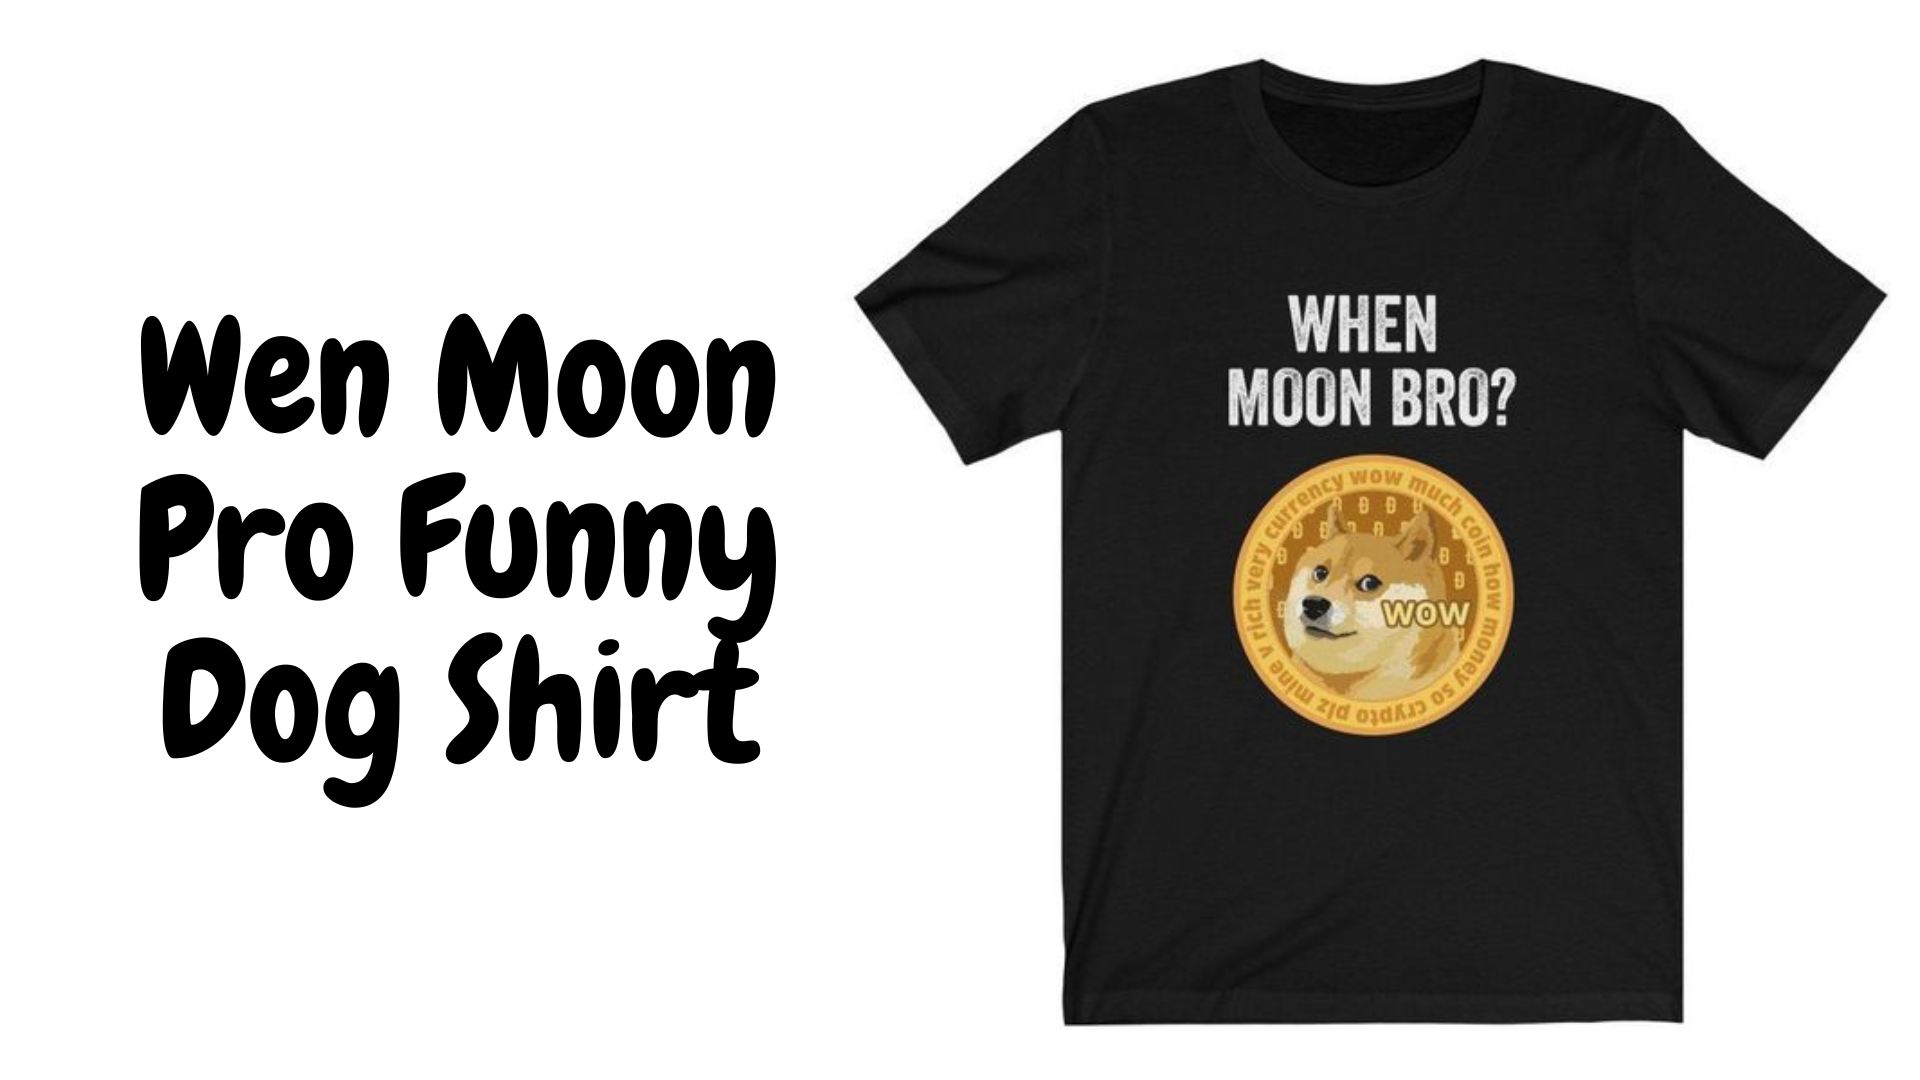 A black shirt with a dog and words when moon bro